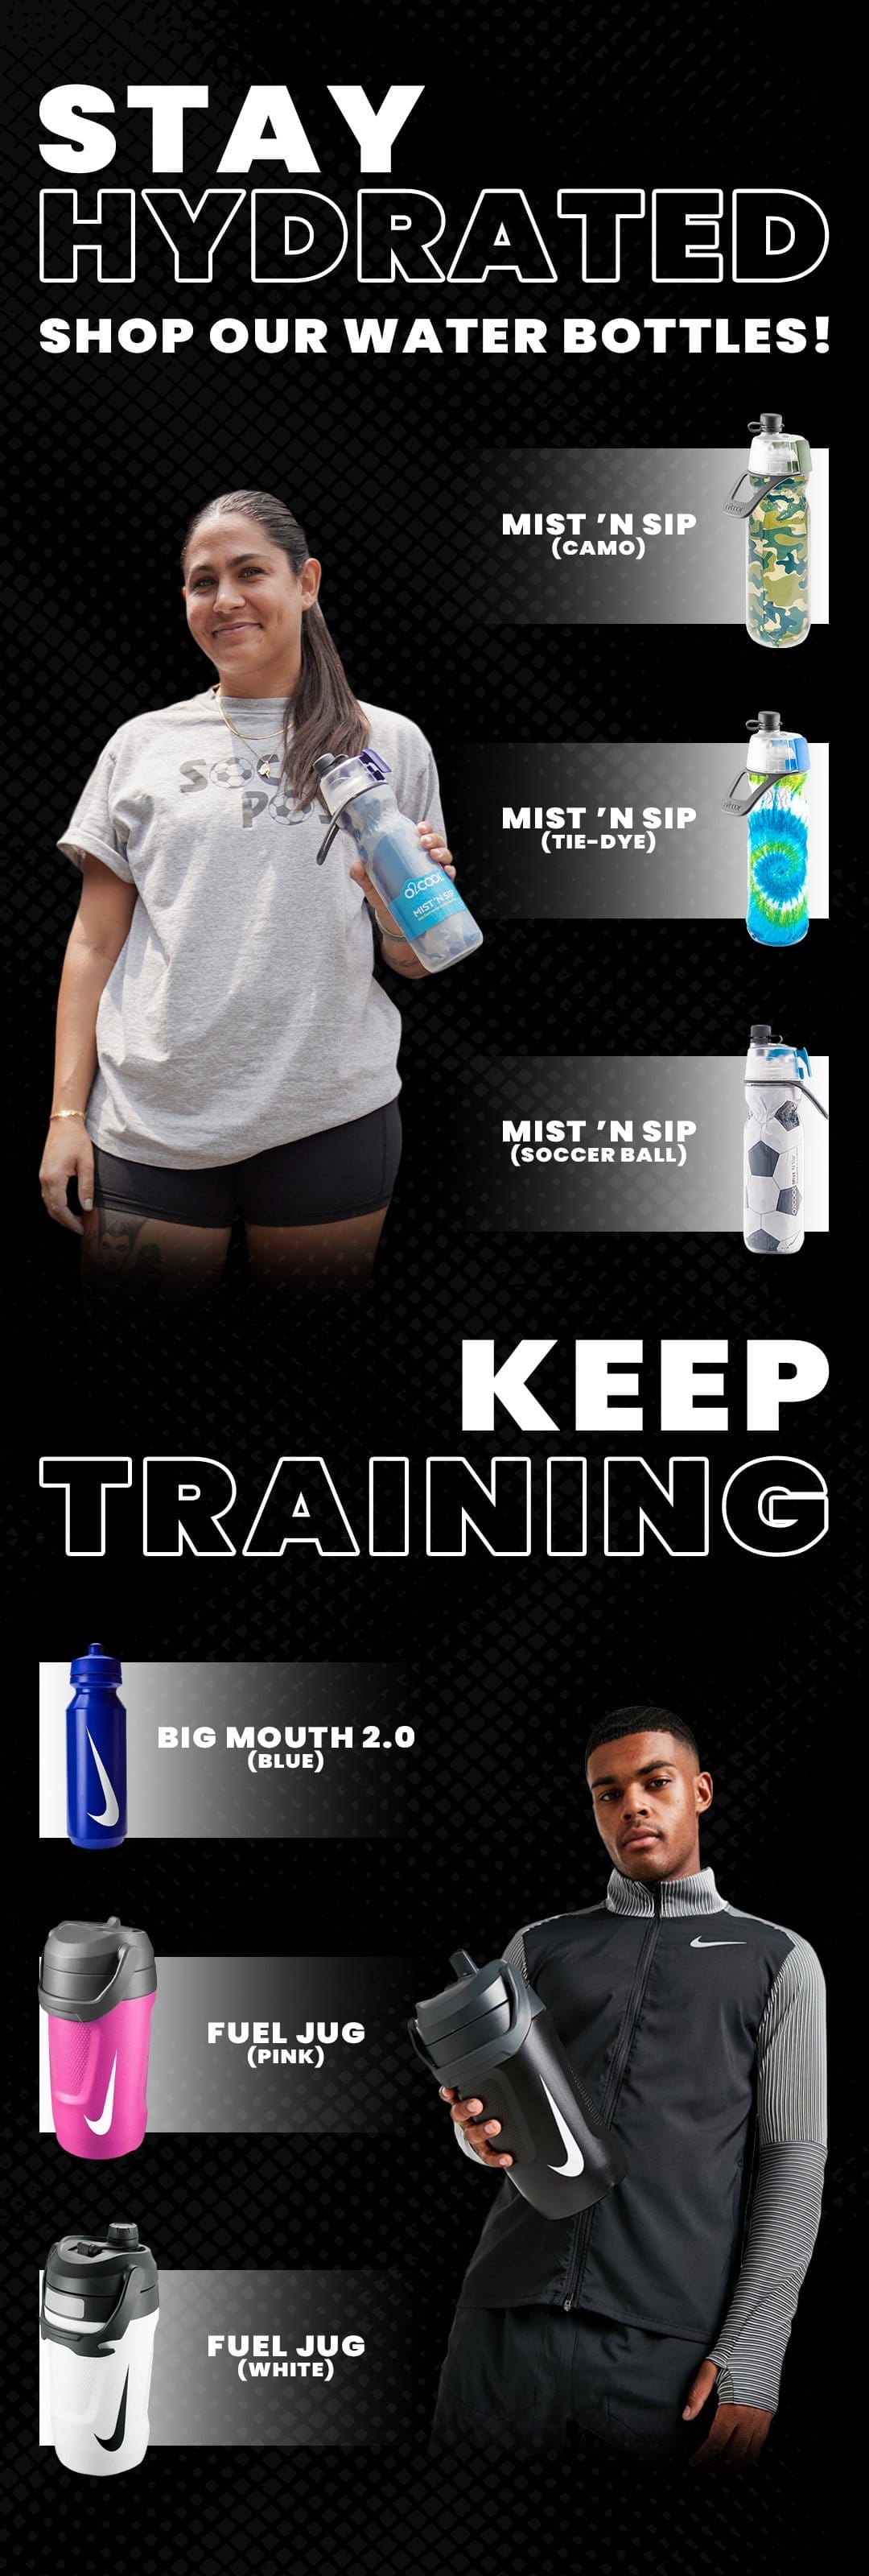 STAY HYDRATED SHOP OUR WATER BOTTLES! MIST 'N SIP (CAMO) MIST 'N SIP (TIE-DYE) g09. MIST 'N SIP (SOCCER BALL KEEP TRAINING BIG MOUTH 2.0 FUEL JUG (PINK) FUEL JUG (WHITE)